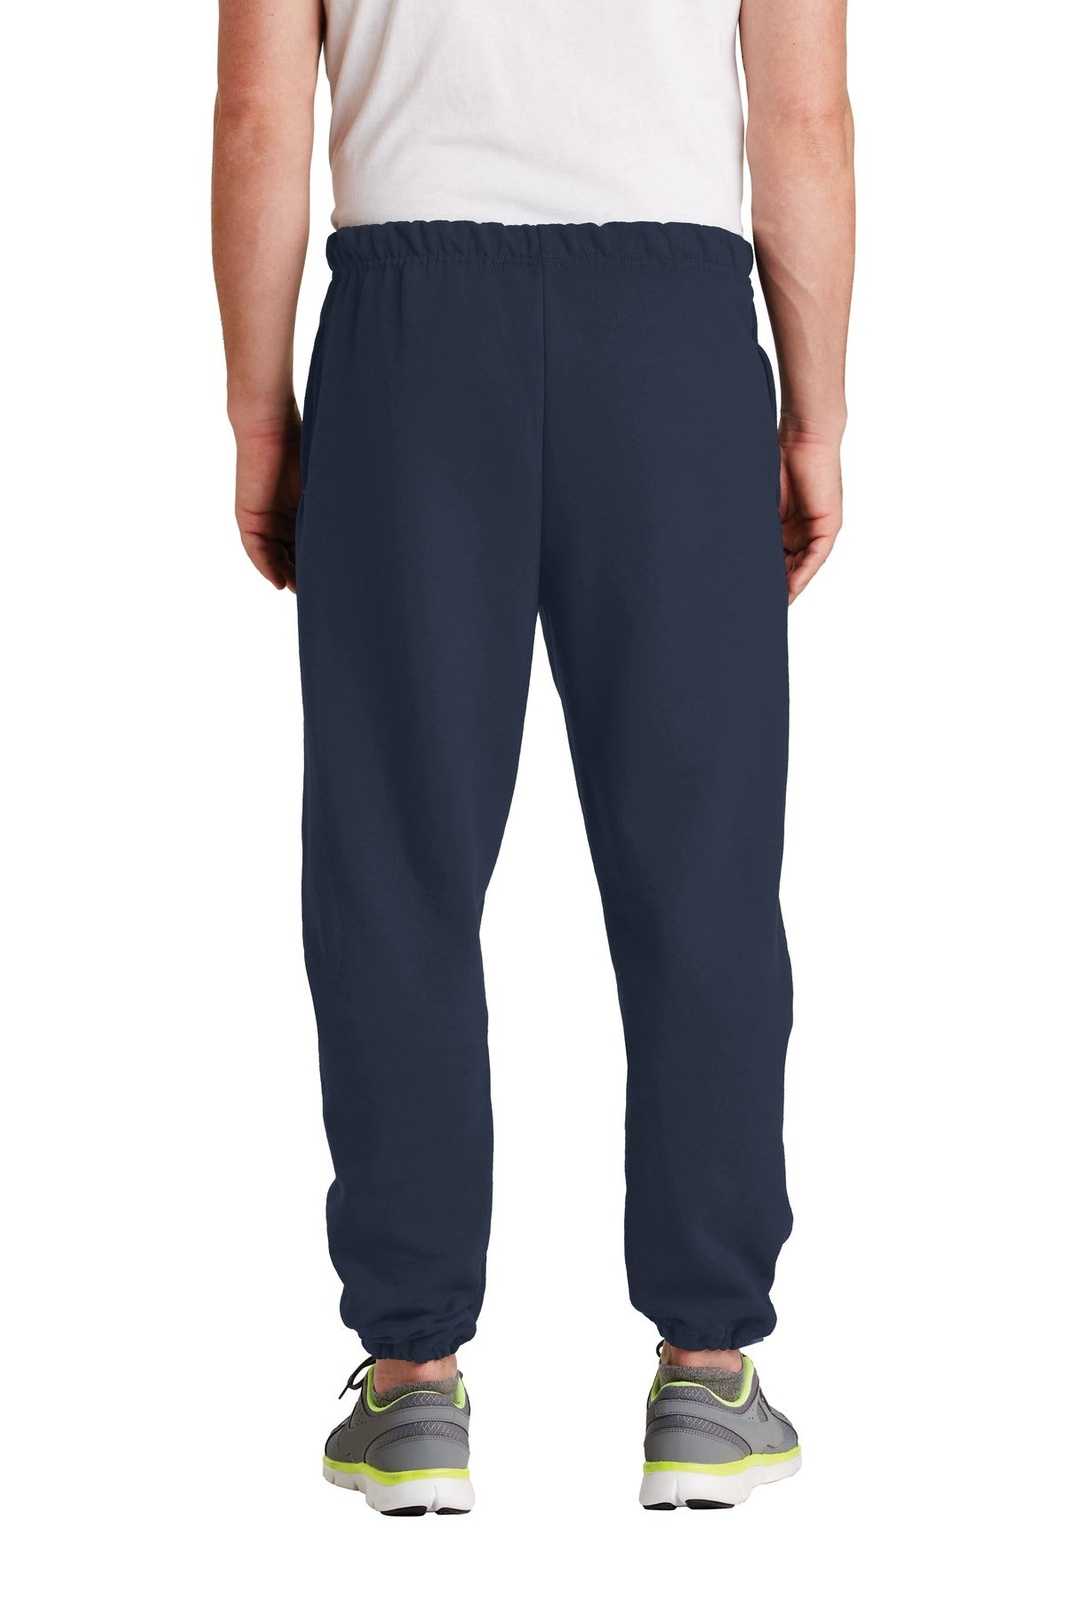 Jerzees 4850MP Super Sweats Nublend Sweatpant with Pockets - Navy - HIT a Double